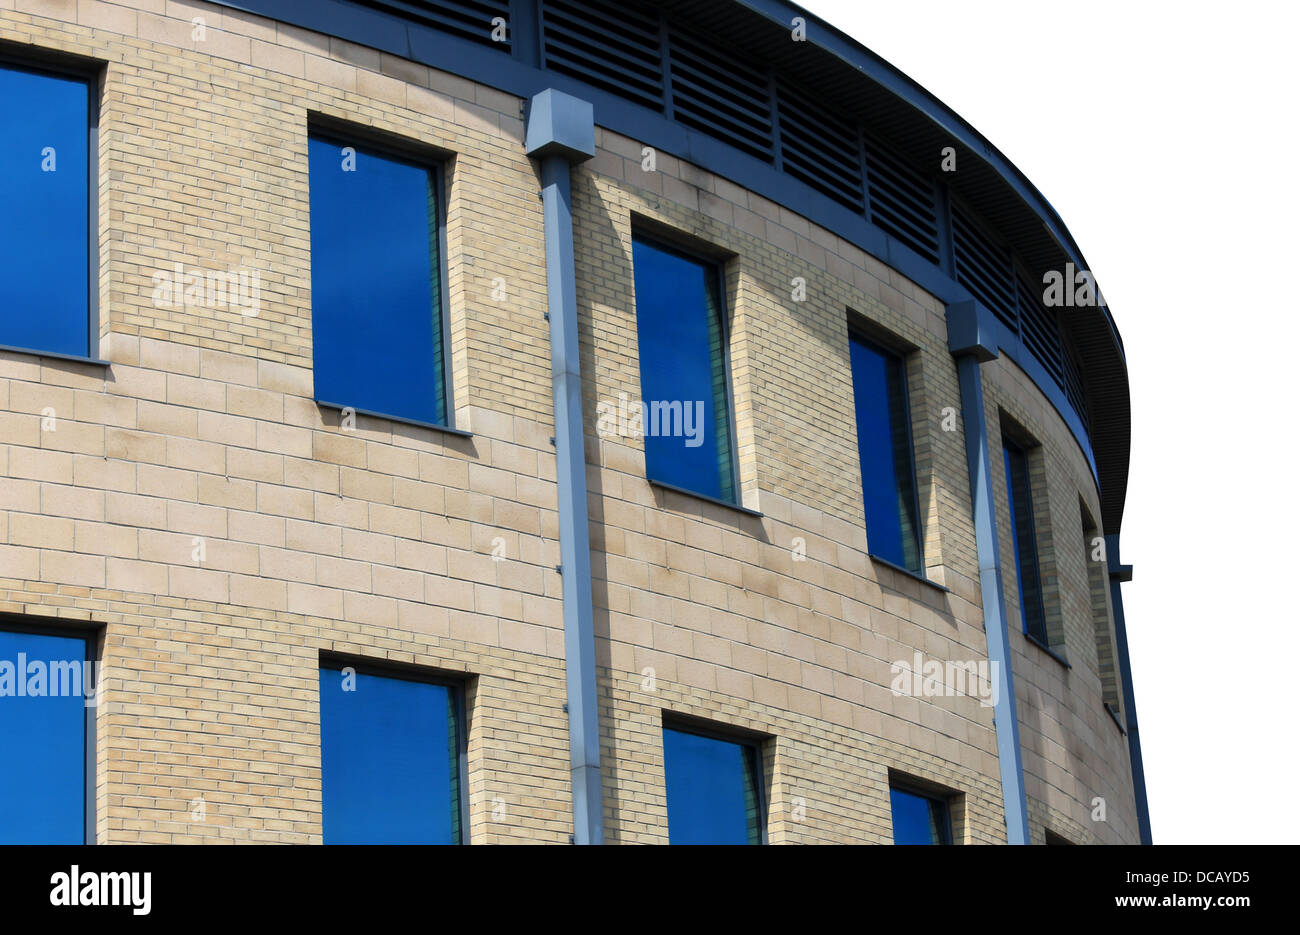 Exterior of curved modern office building with blue windows isolated on white background. Stock Photo